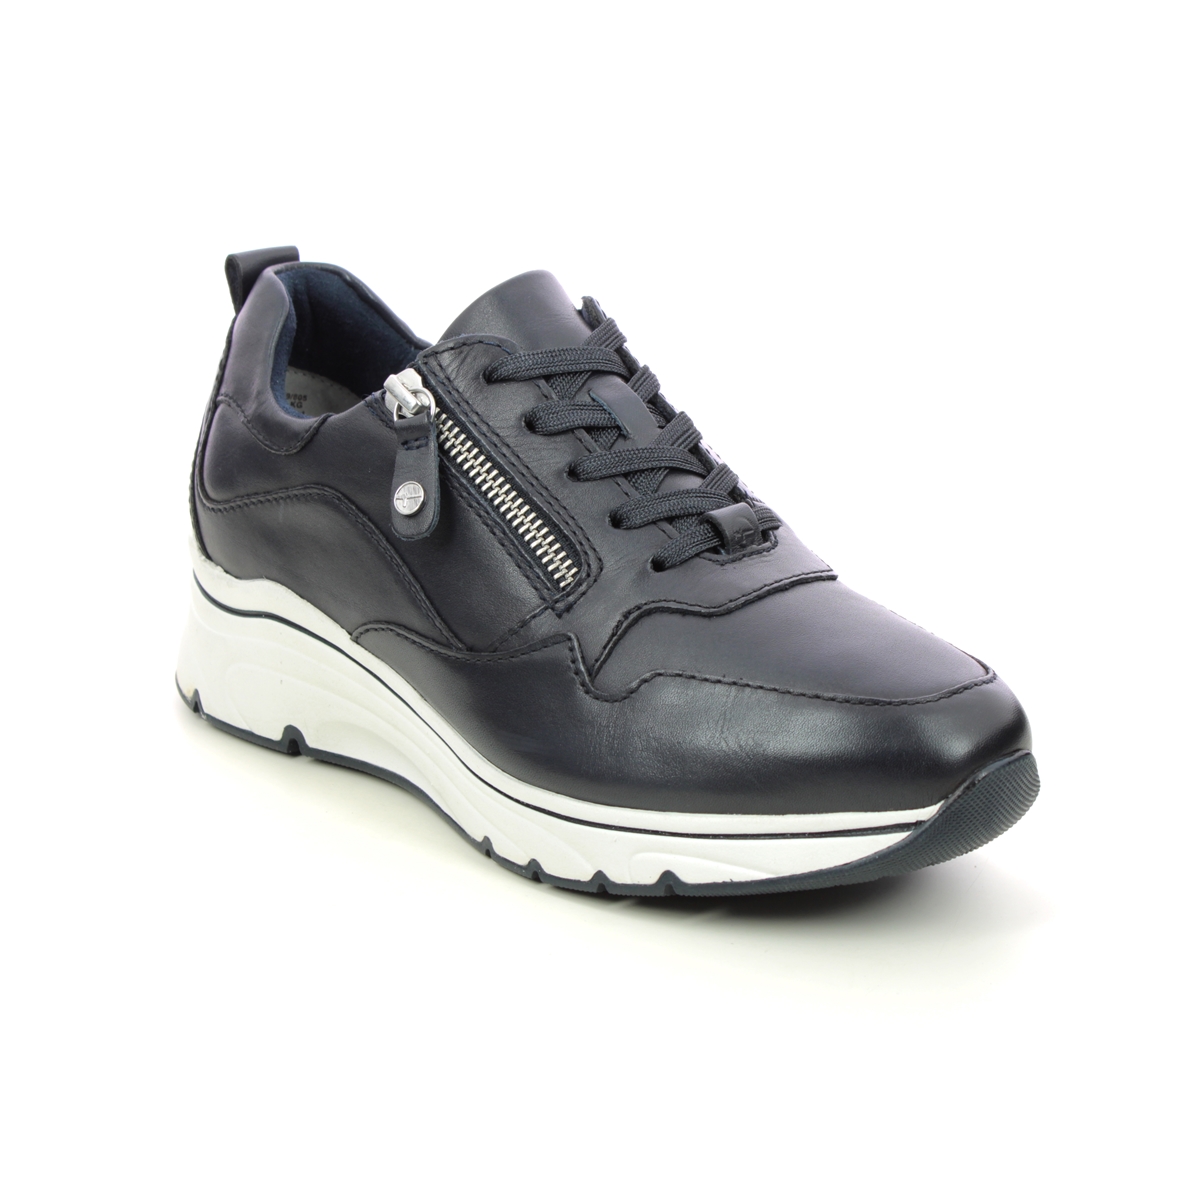 Tamaris Vinnie Navy leather Womens trainers 23711-39-805 in a Plain Leather in Size 36